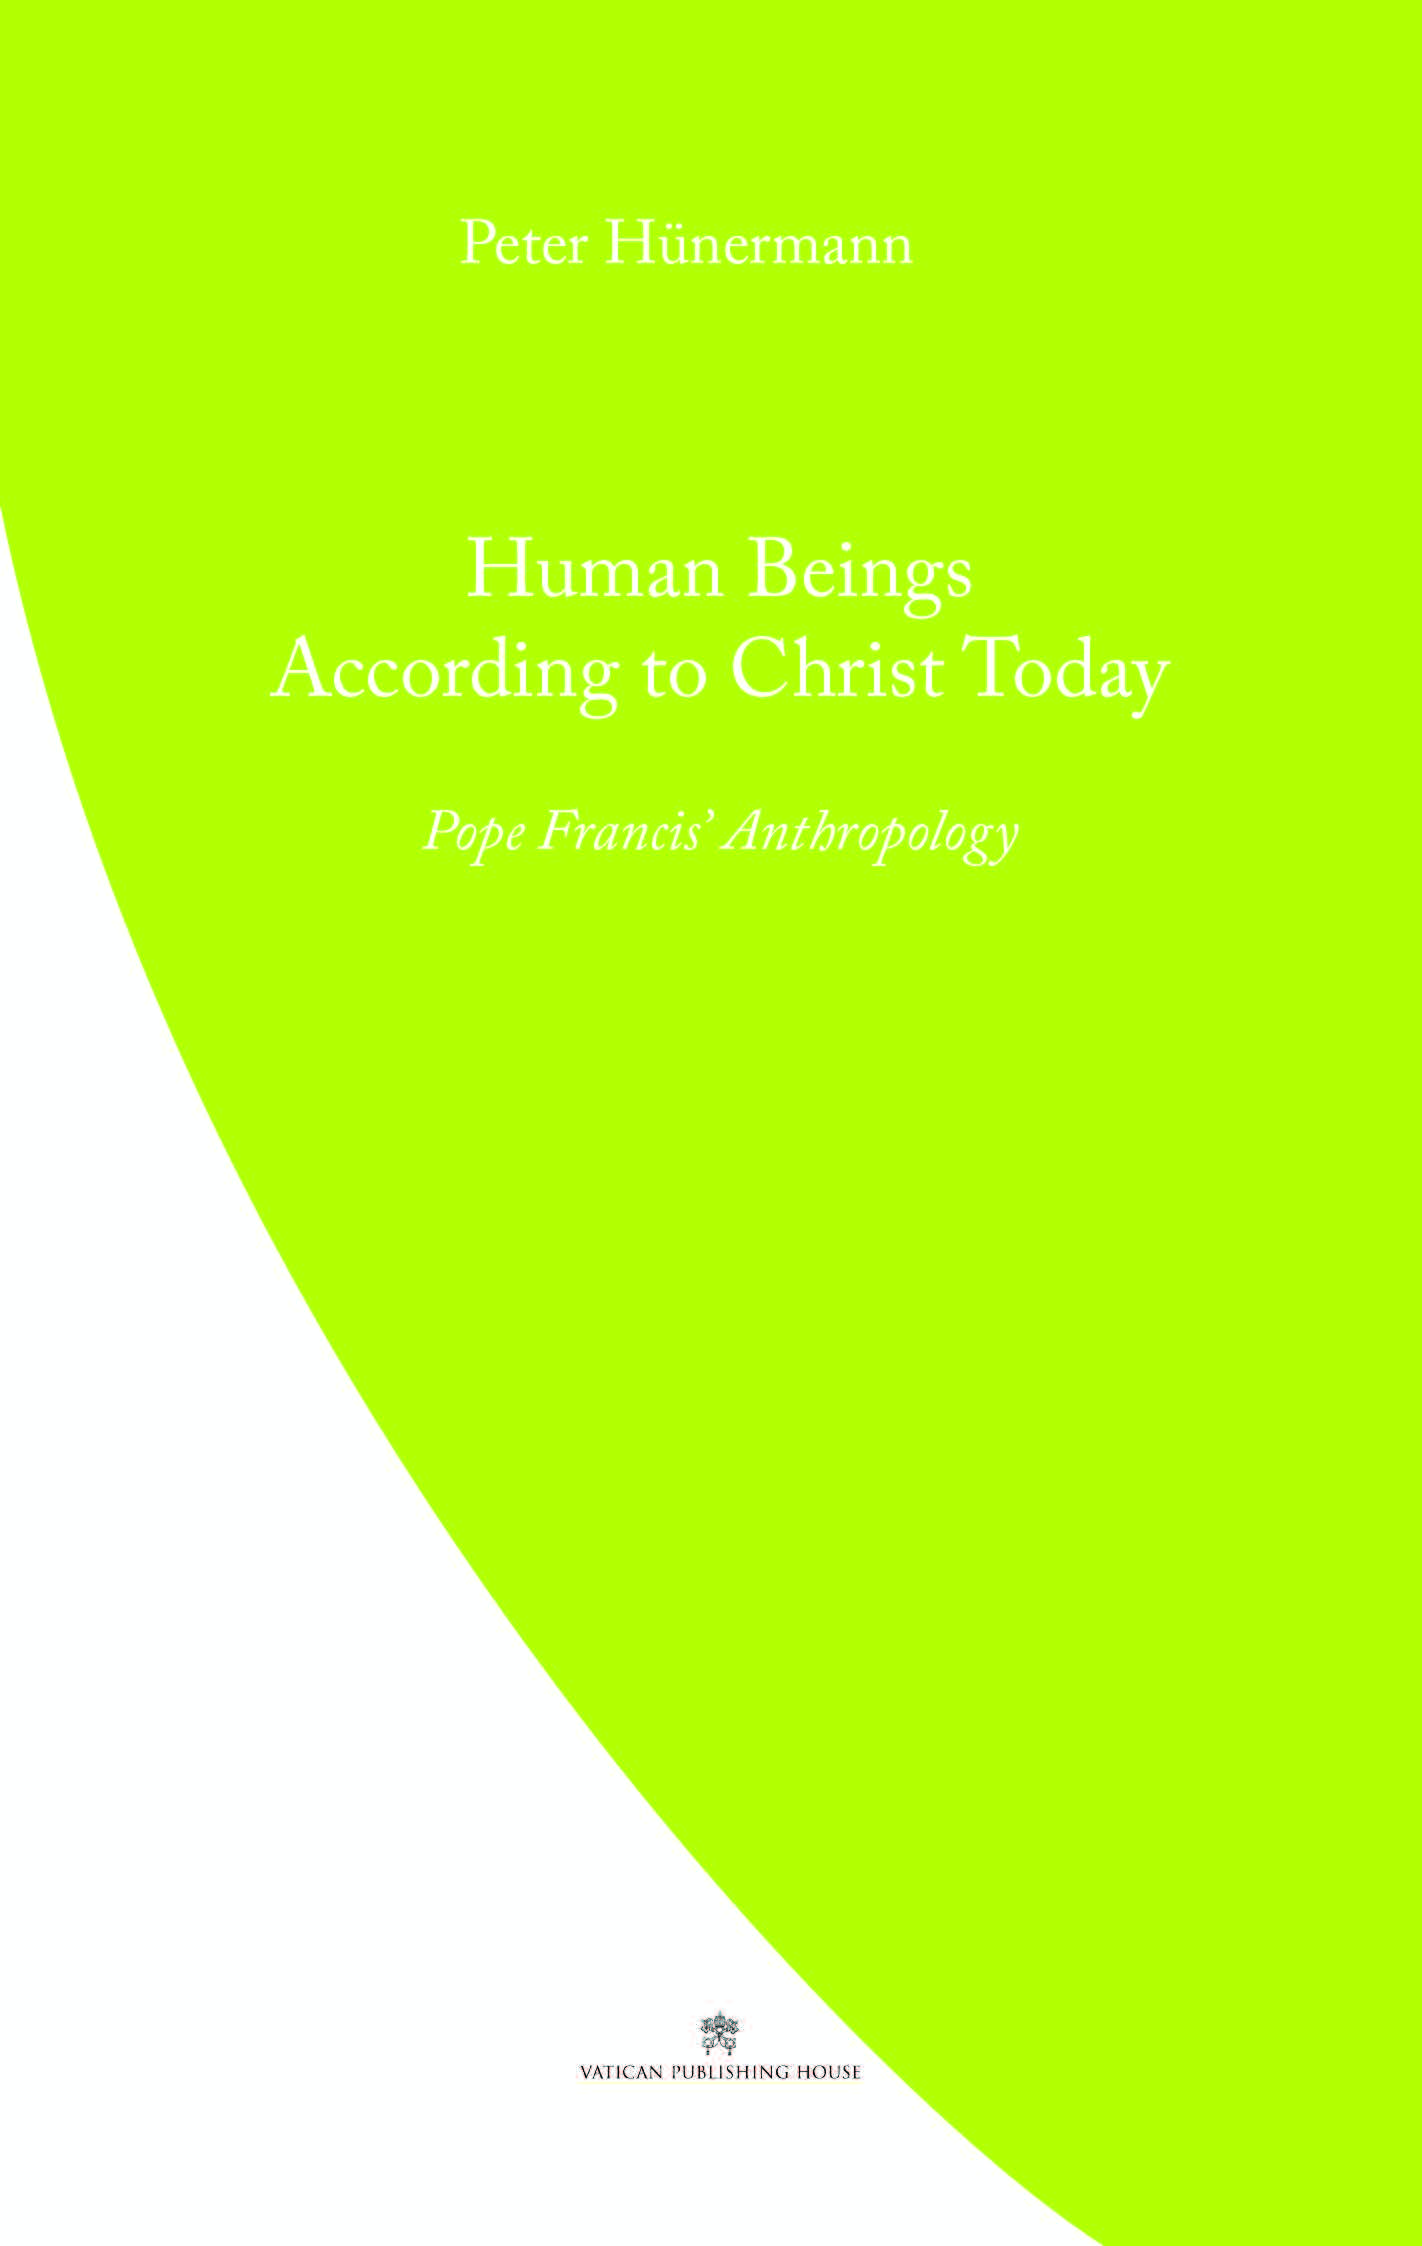 Human beings according to Christ Today  Pope Francis' Anthropology / Peter Hunermann